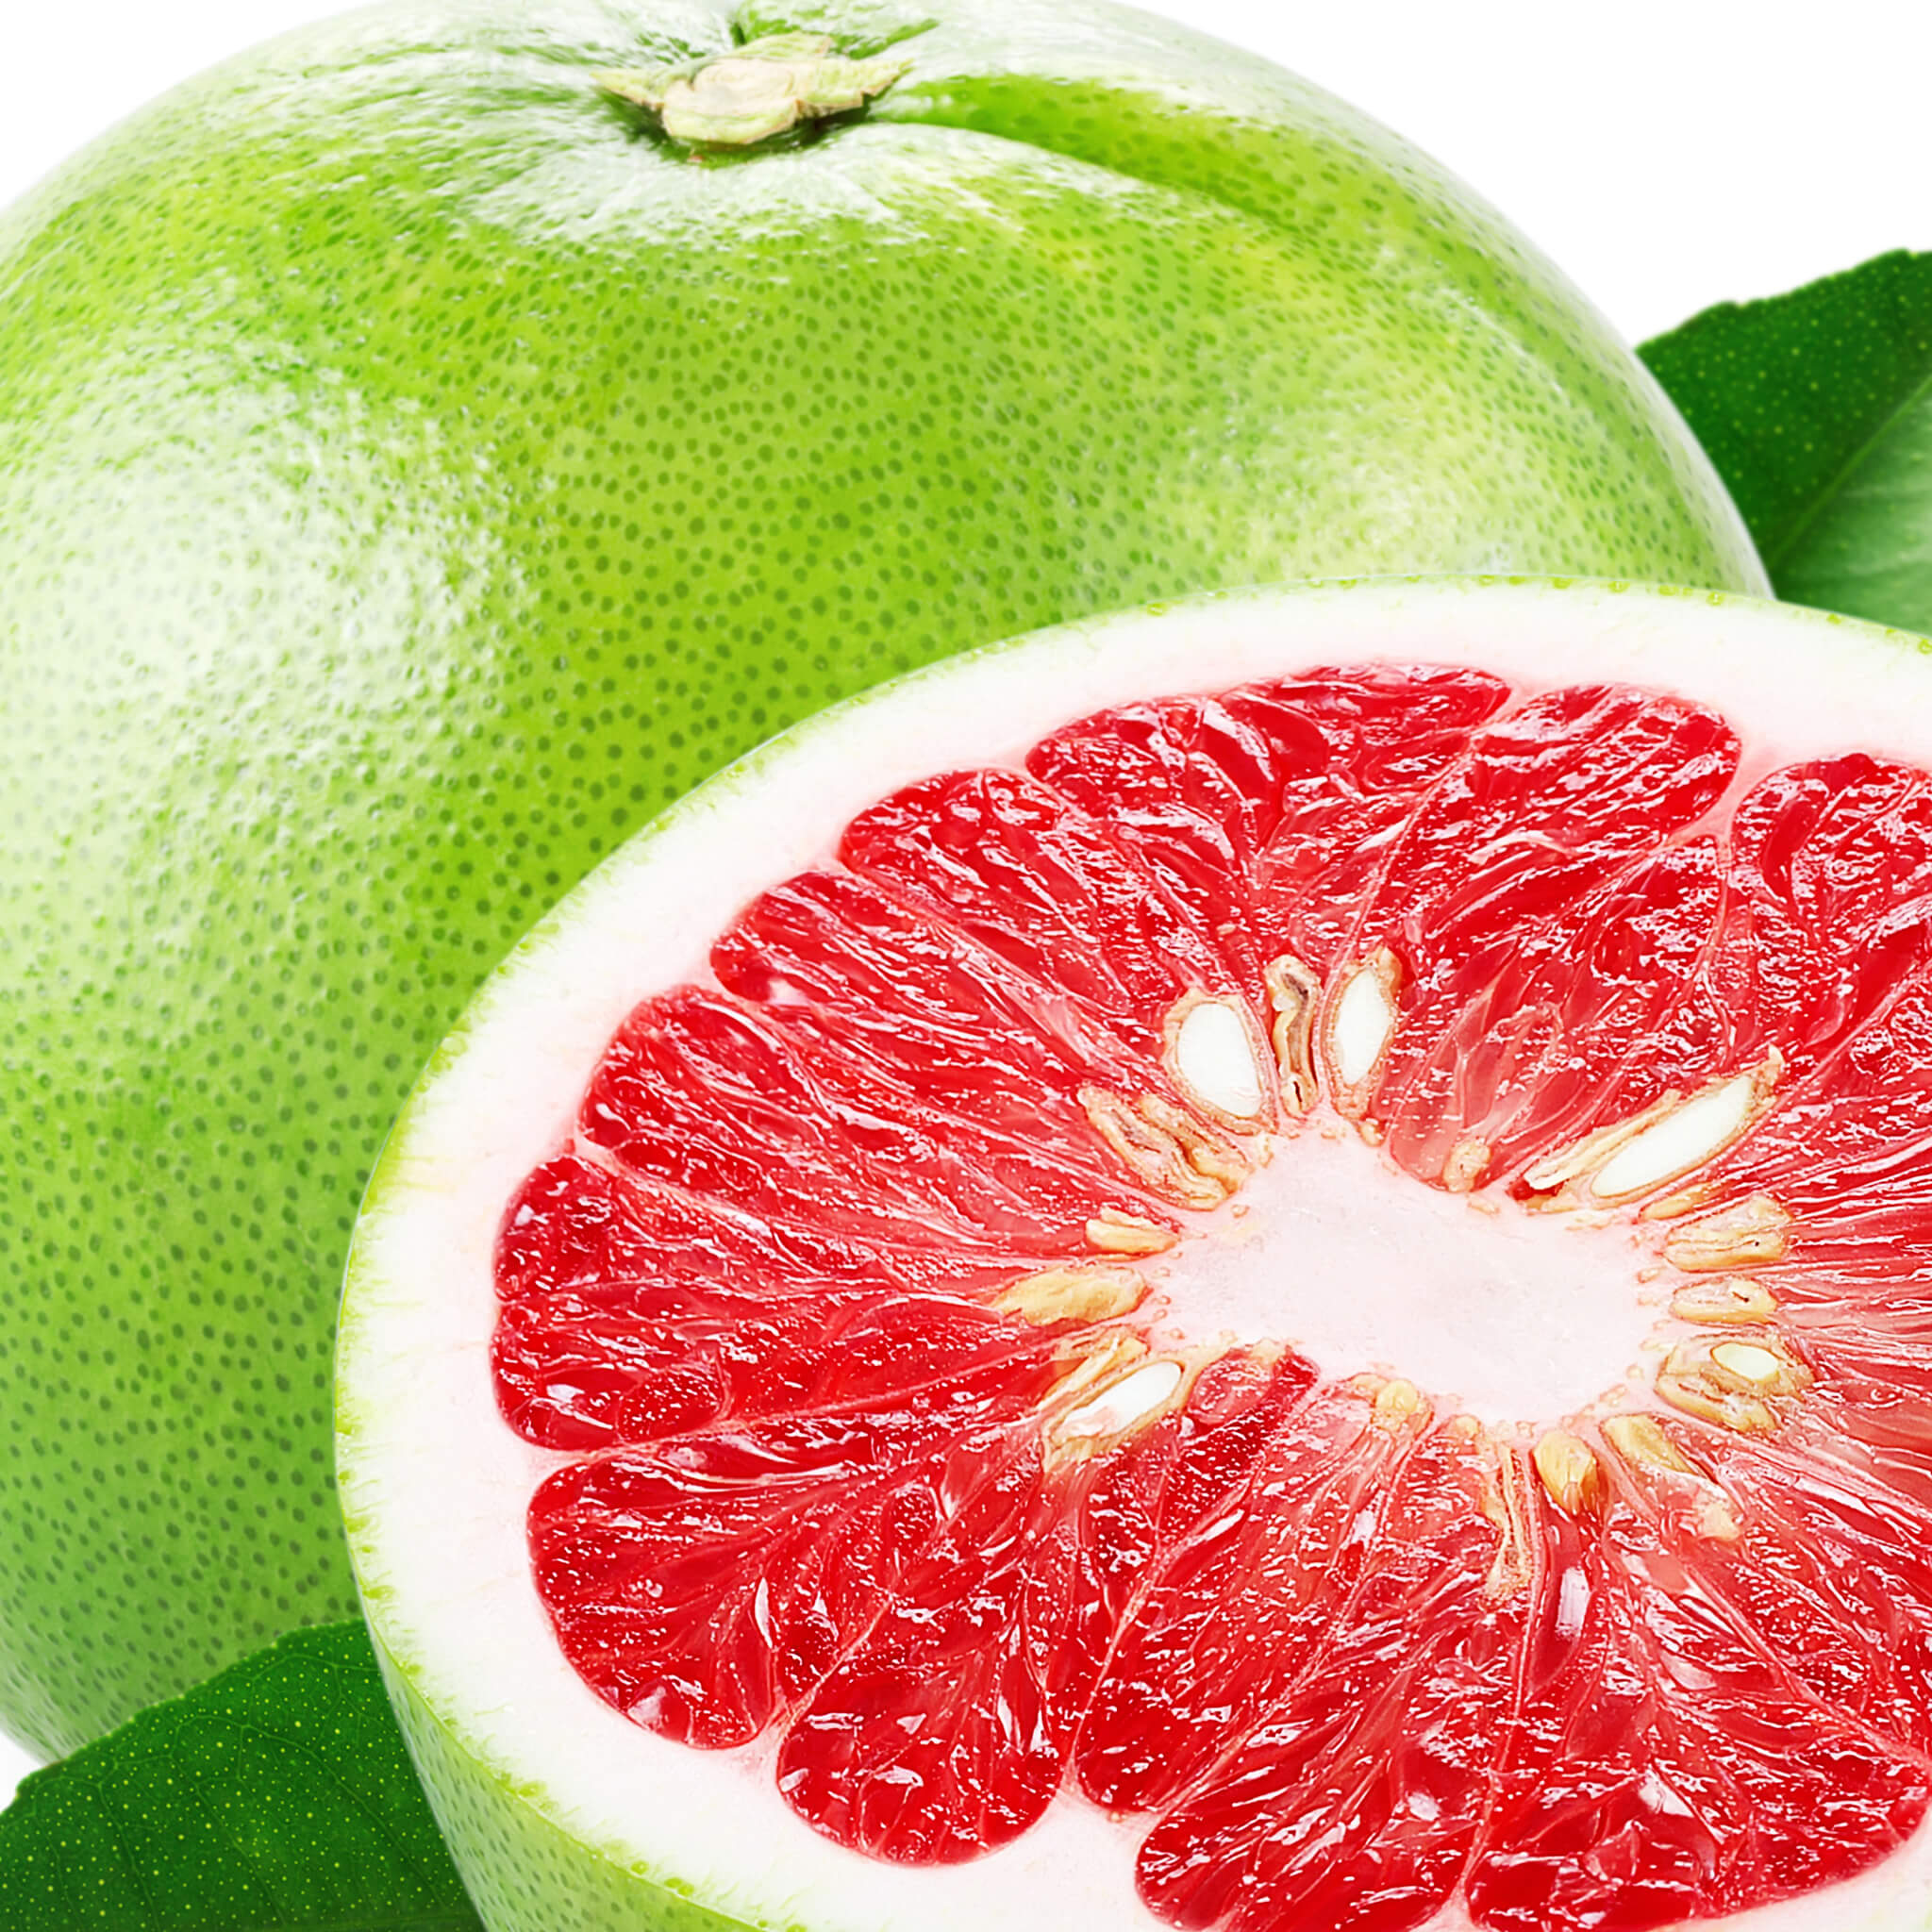 Product Page Key Ingredients: Pomelo